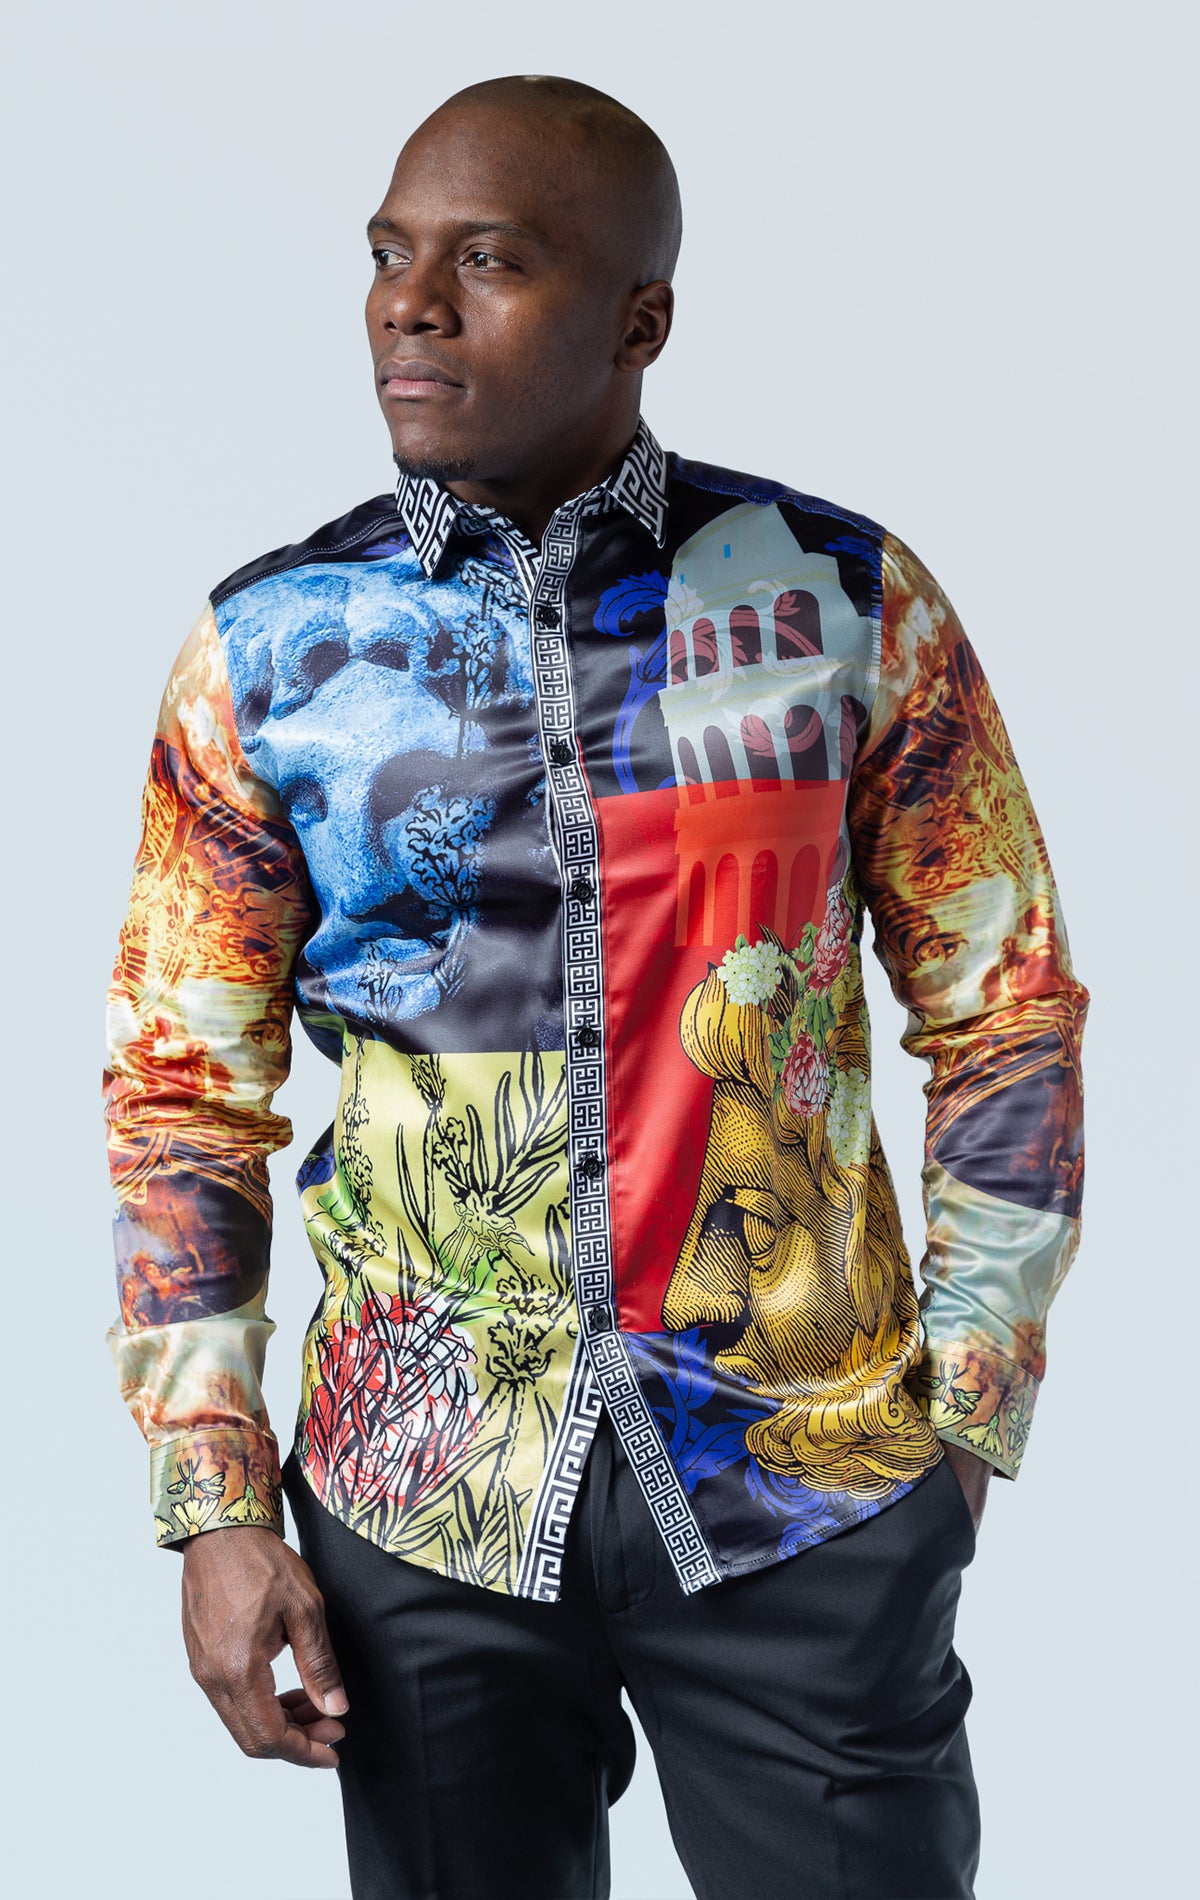 Long Sleeve Shirt with bold prints and detailed graphics, showcasing a stylish and comfortable design.